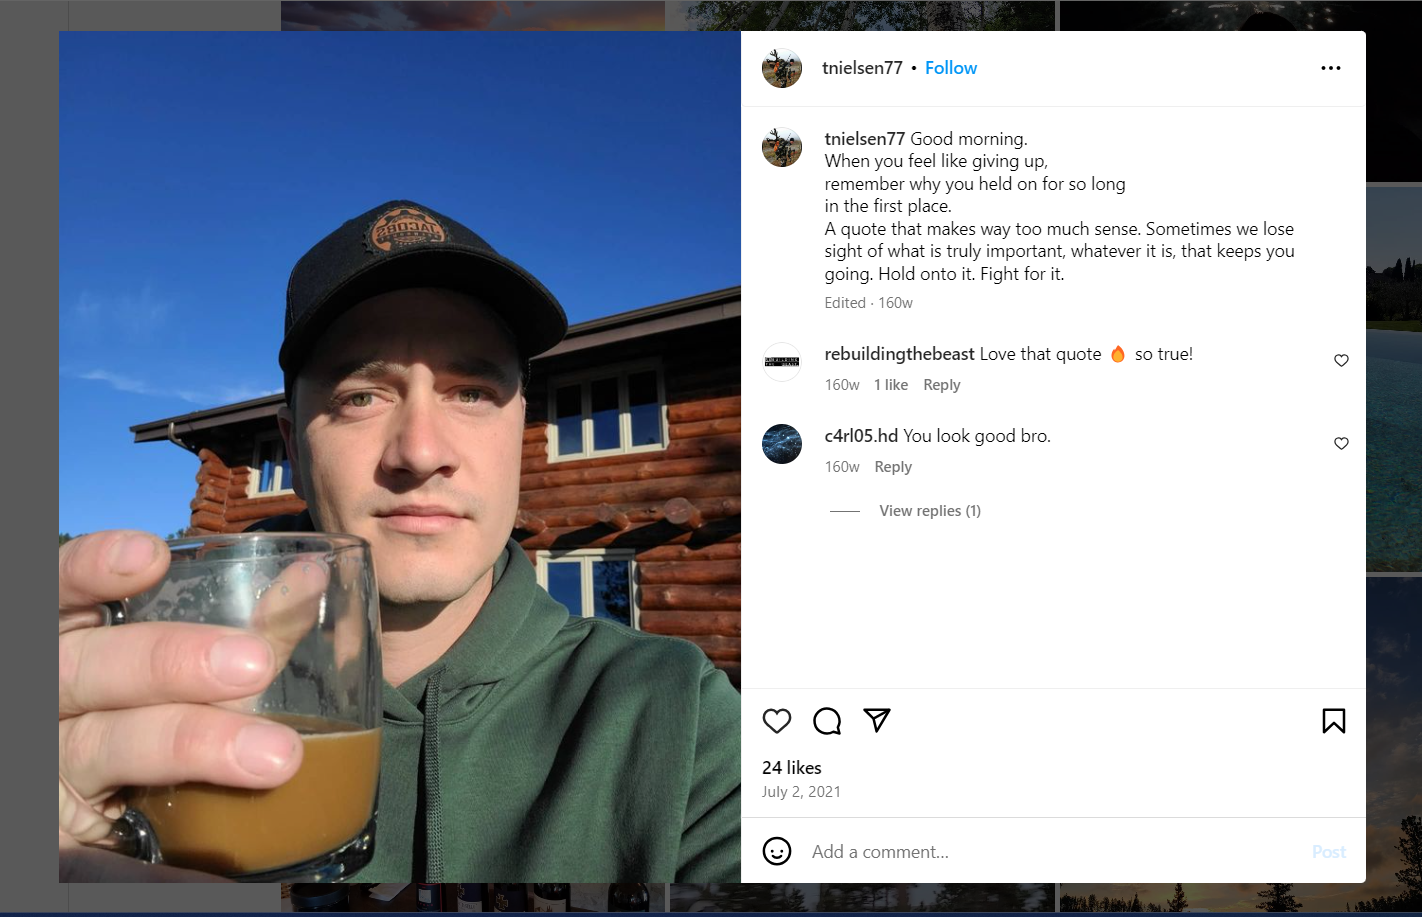 Instagram photo of a man holding a drink and looking at the camera.